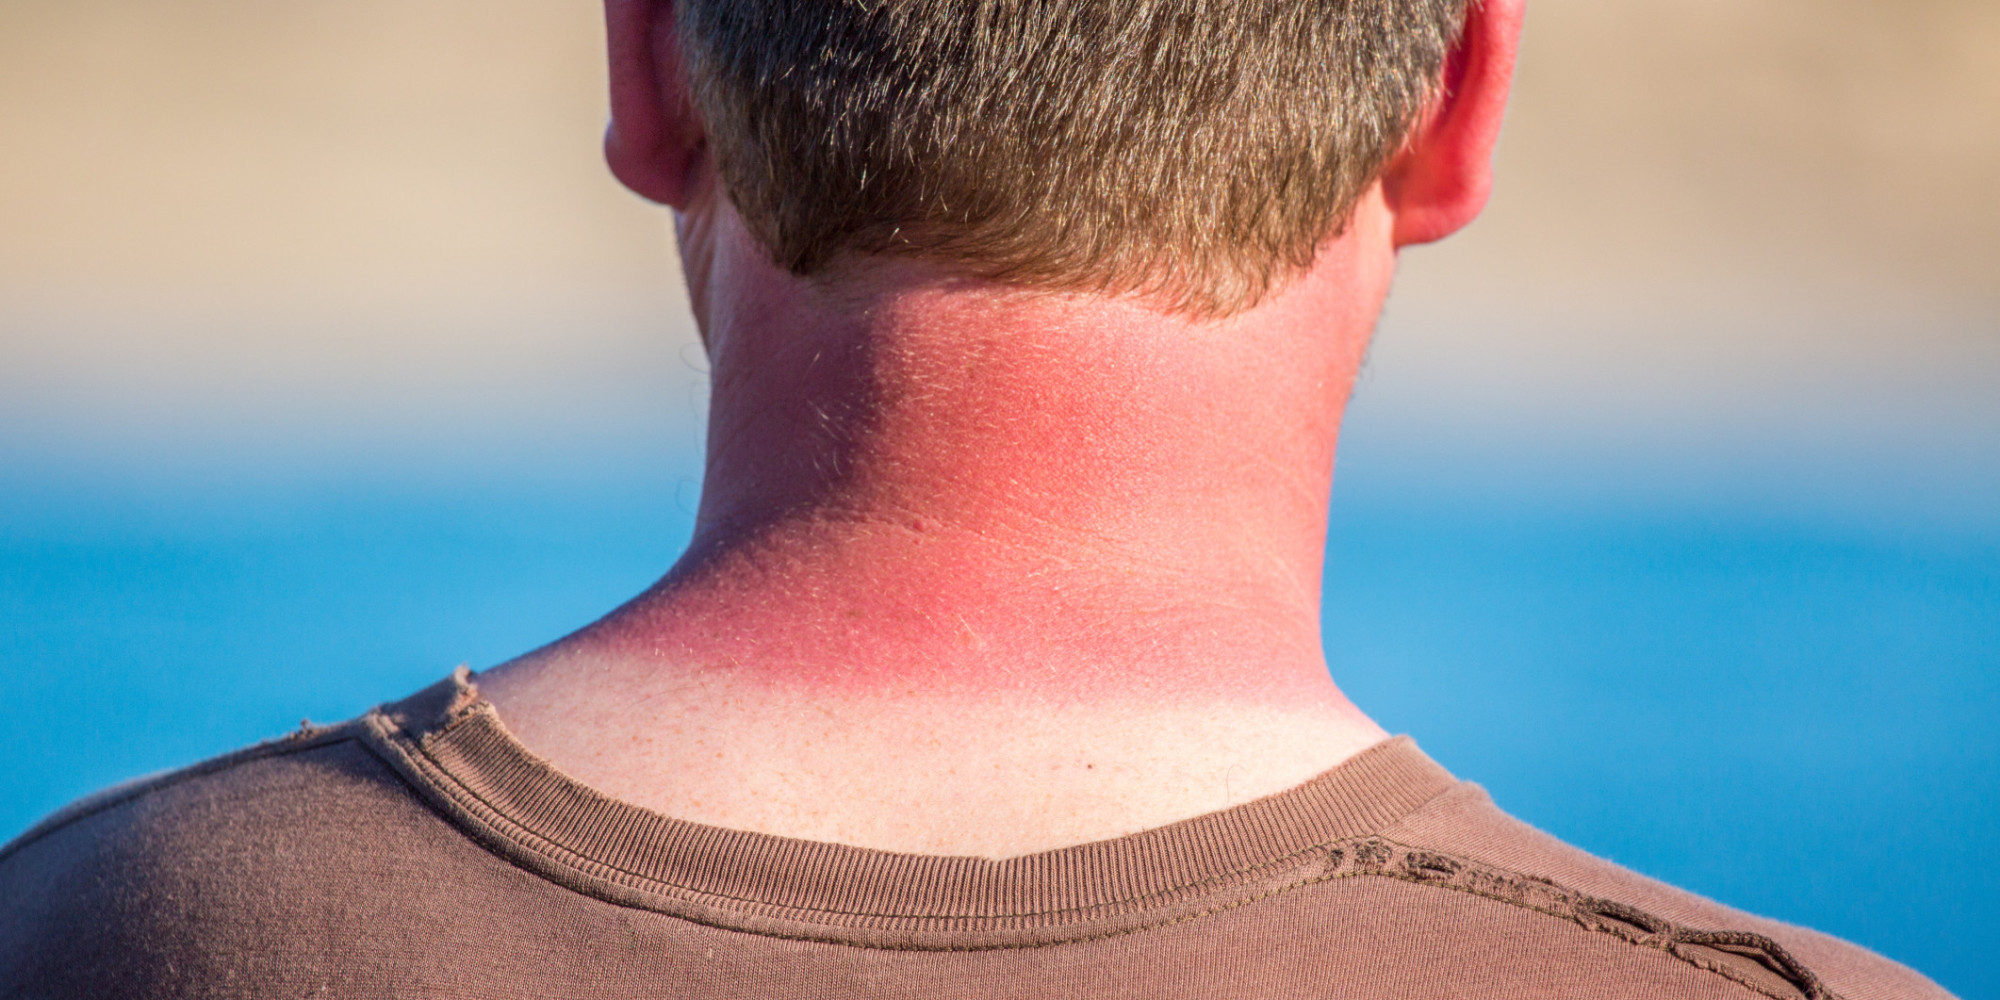 Getting Really Bad Sunburns As A Teen Could Raise Skin Cancer Risk Huffpost